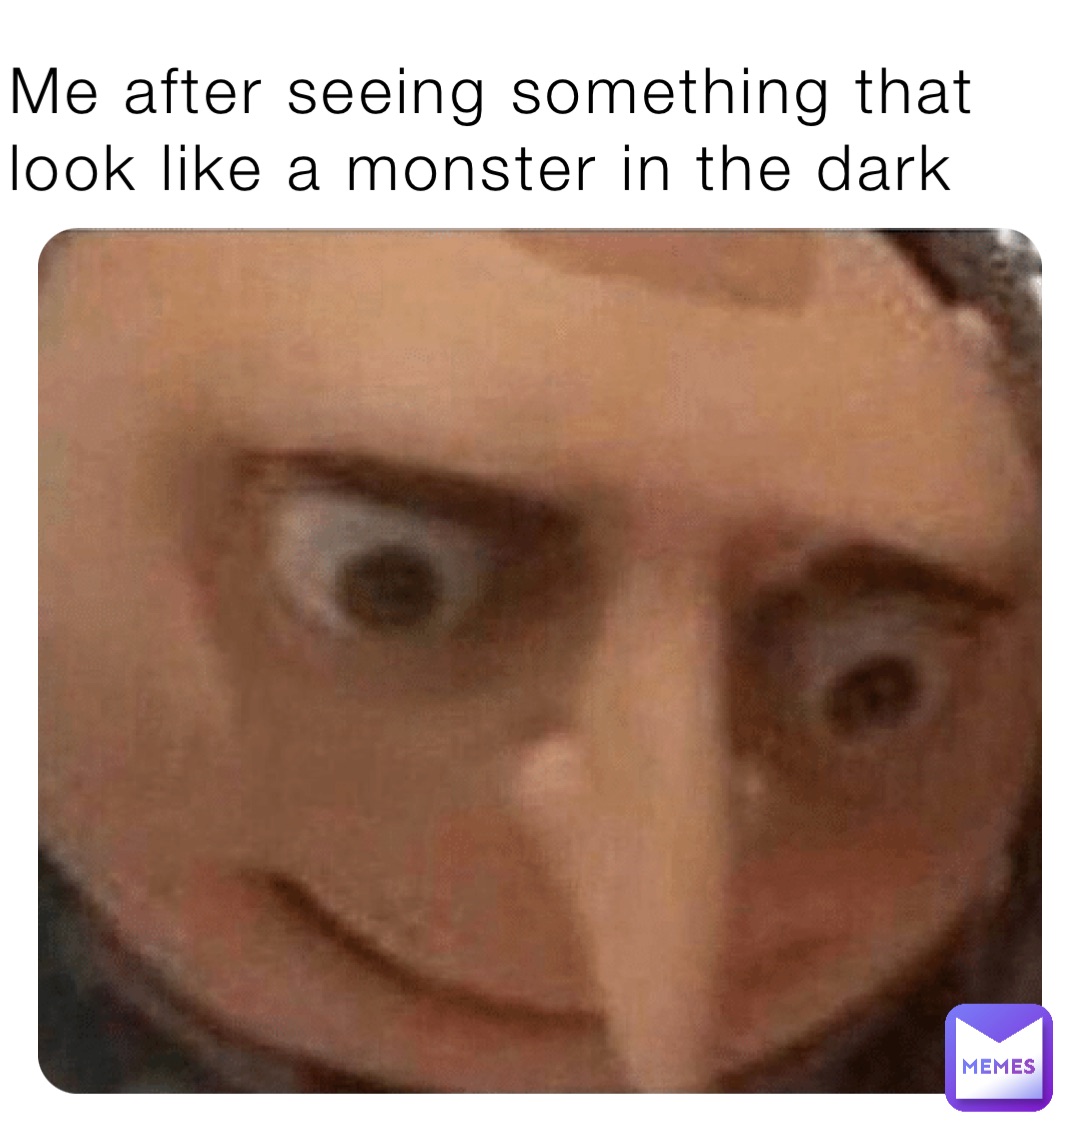 Me after seeing something that look like a monster in the dark